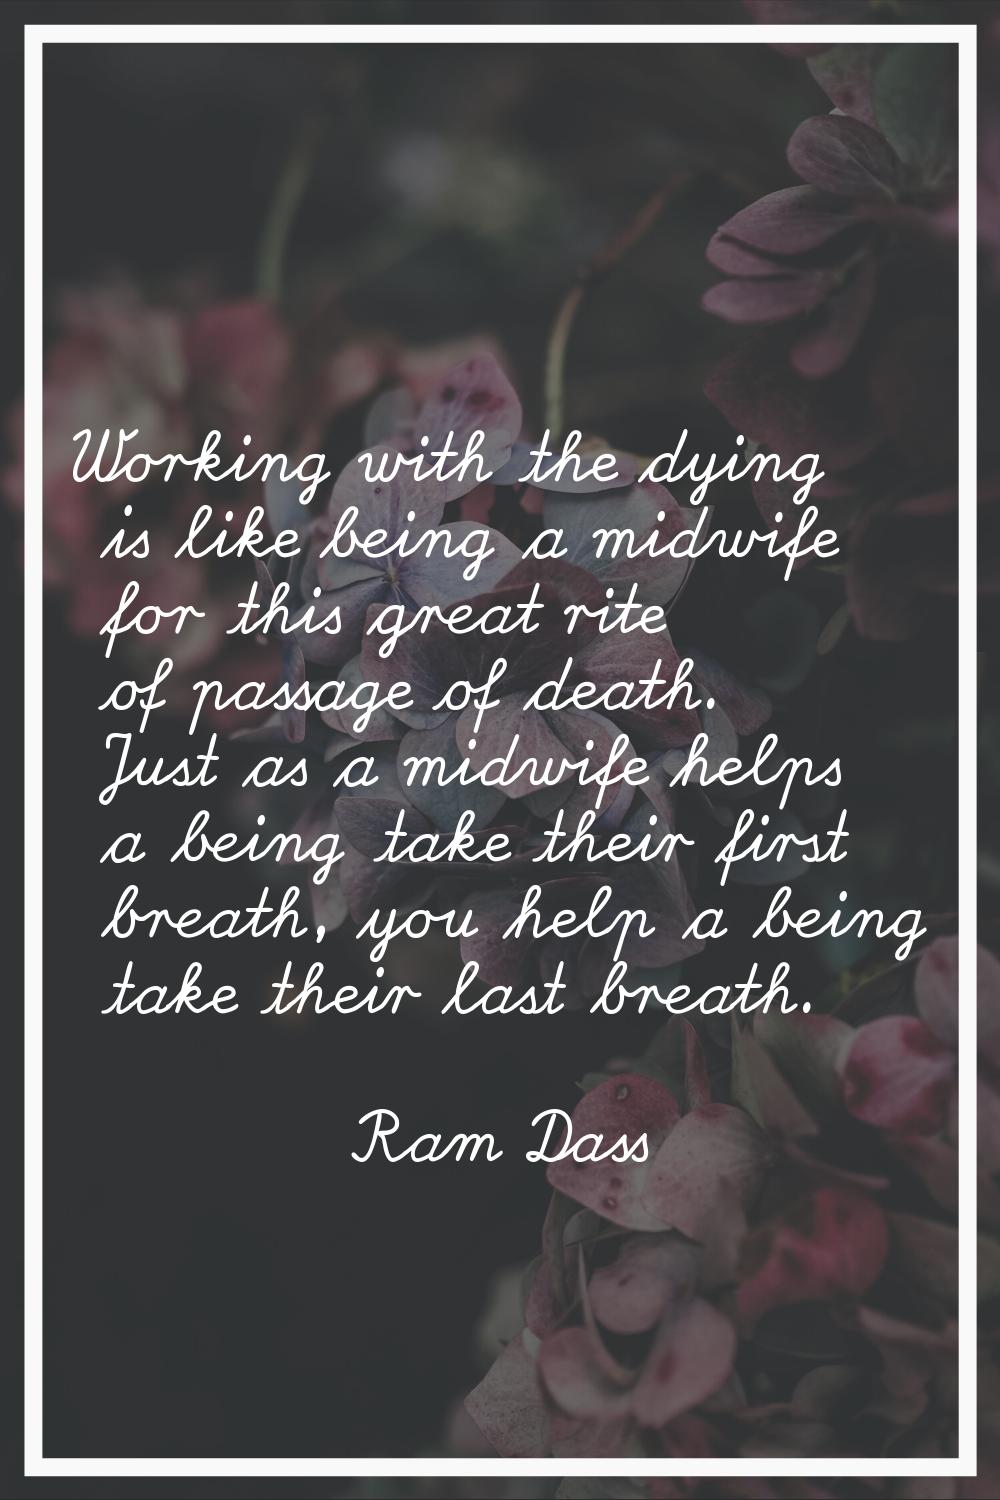 Working with the dying is like being a midwife for this great rite of passage of death. Just as a m